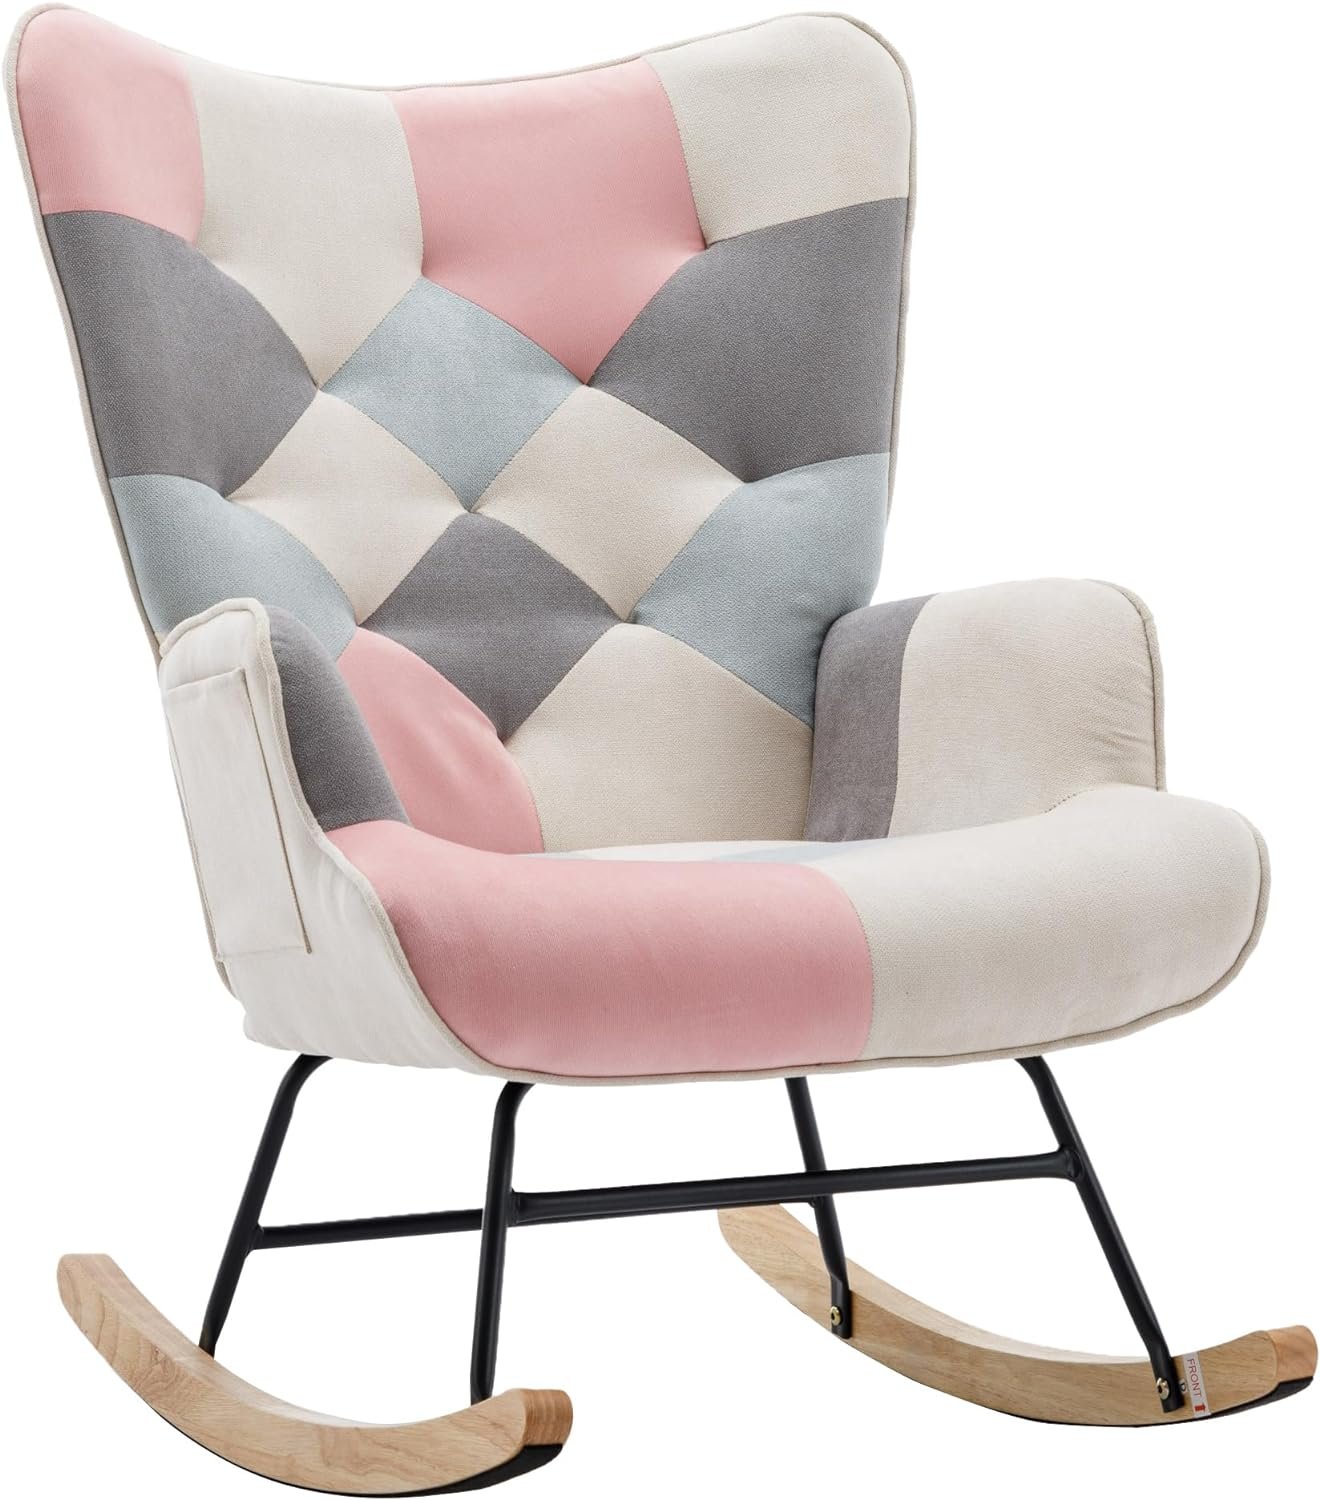 Larmliss 36.6 inch Accent Nursery Rocking for Living Room,Bedroom,Comfy Rocking Chairs with Side Pockets,Upholstered Soft Glider Chair Patchwork with Curved Wing Back  Wood Base(Pink)